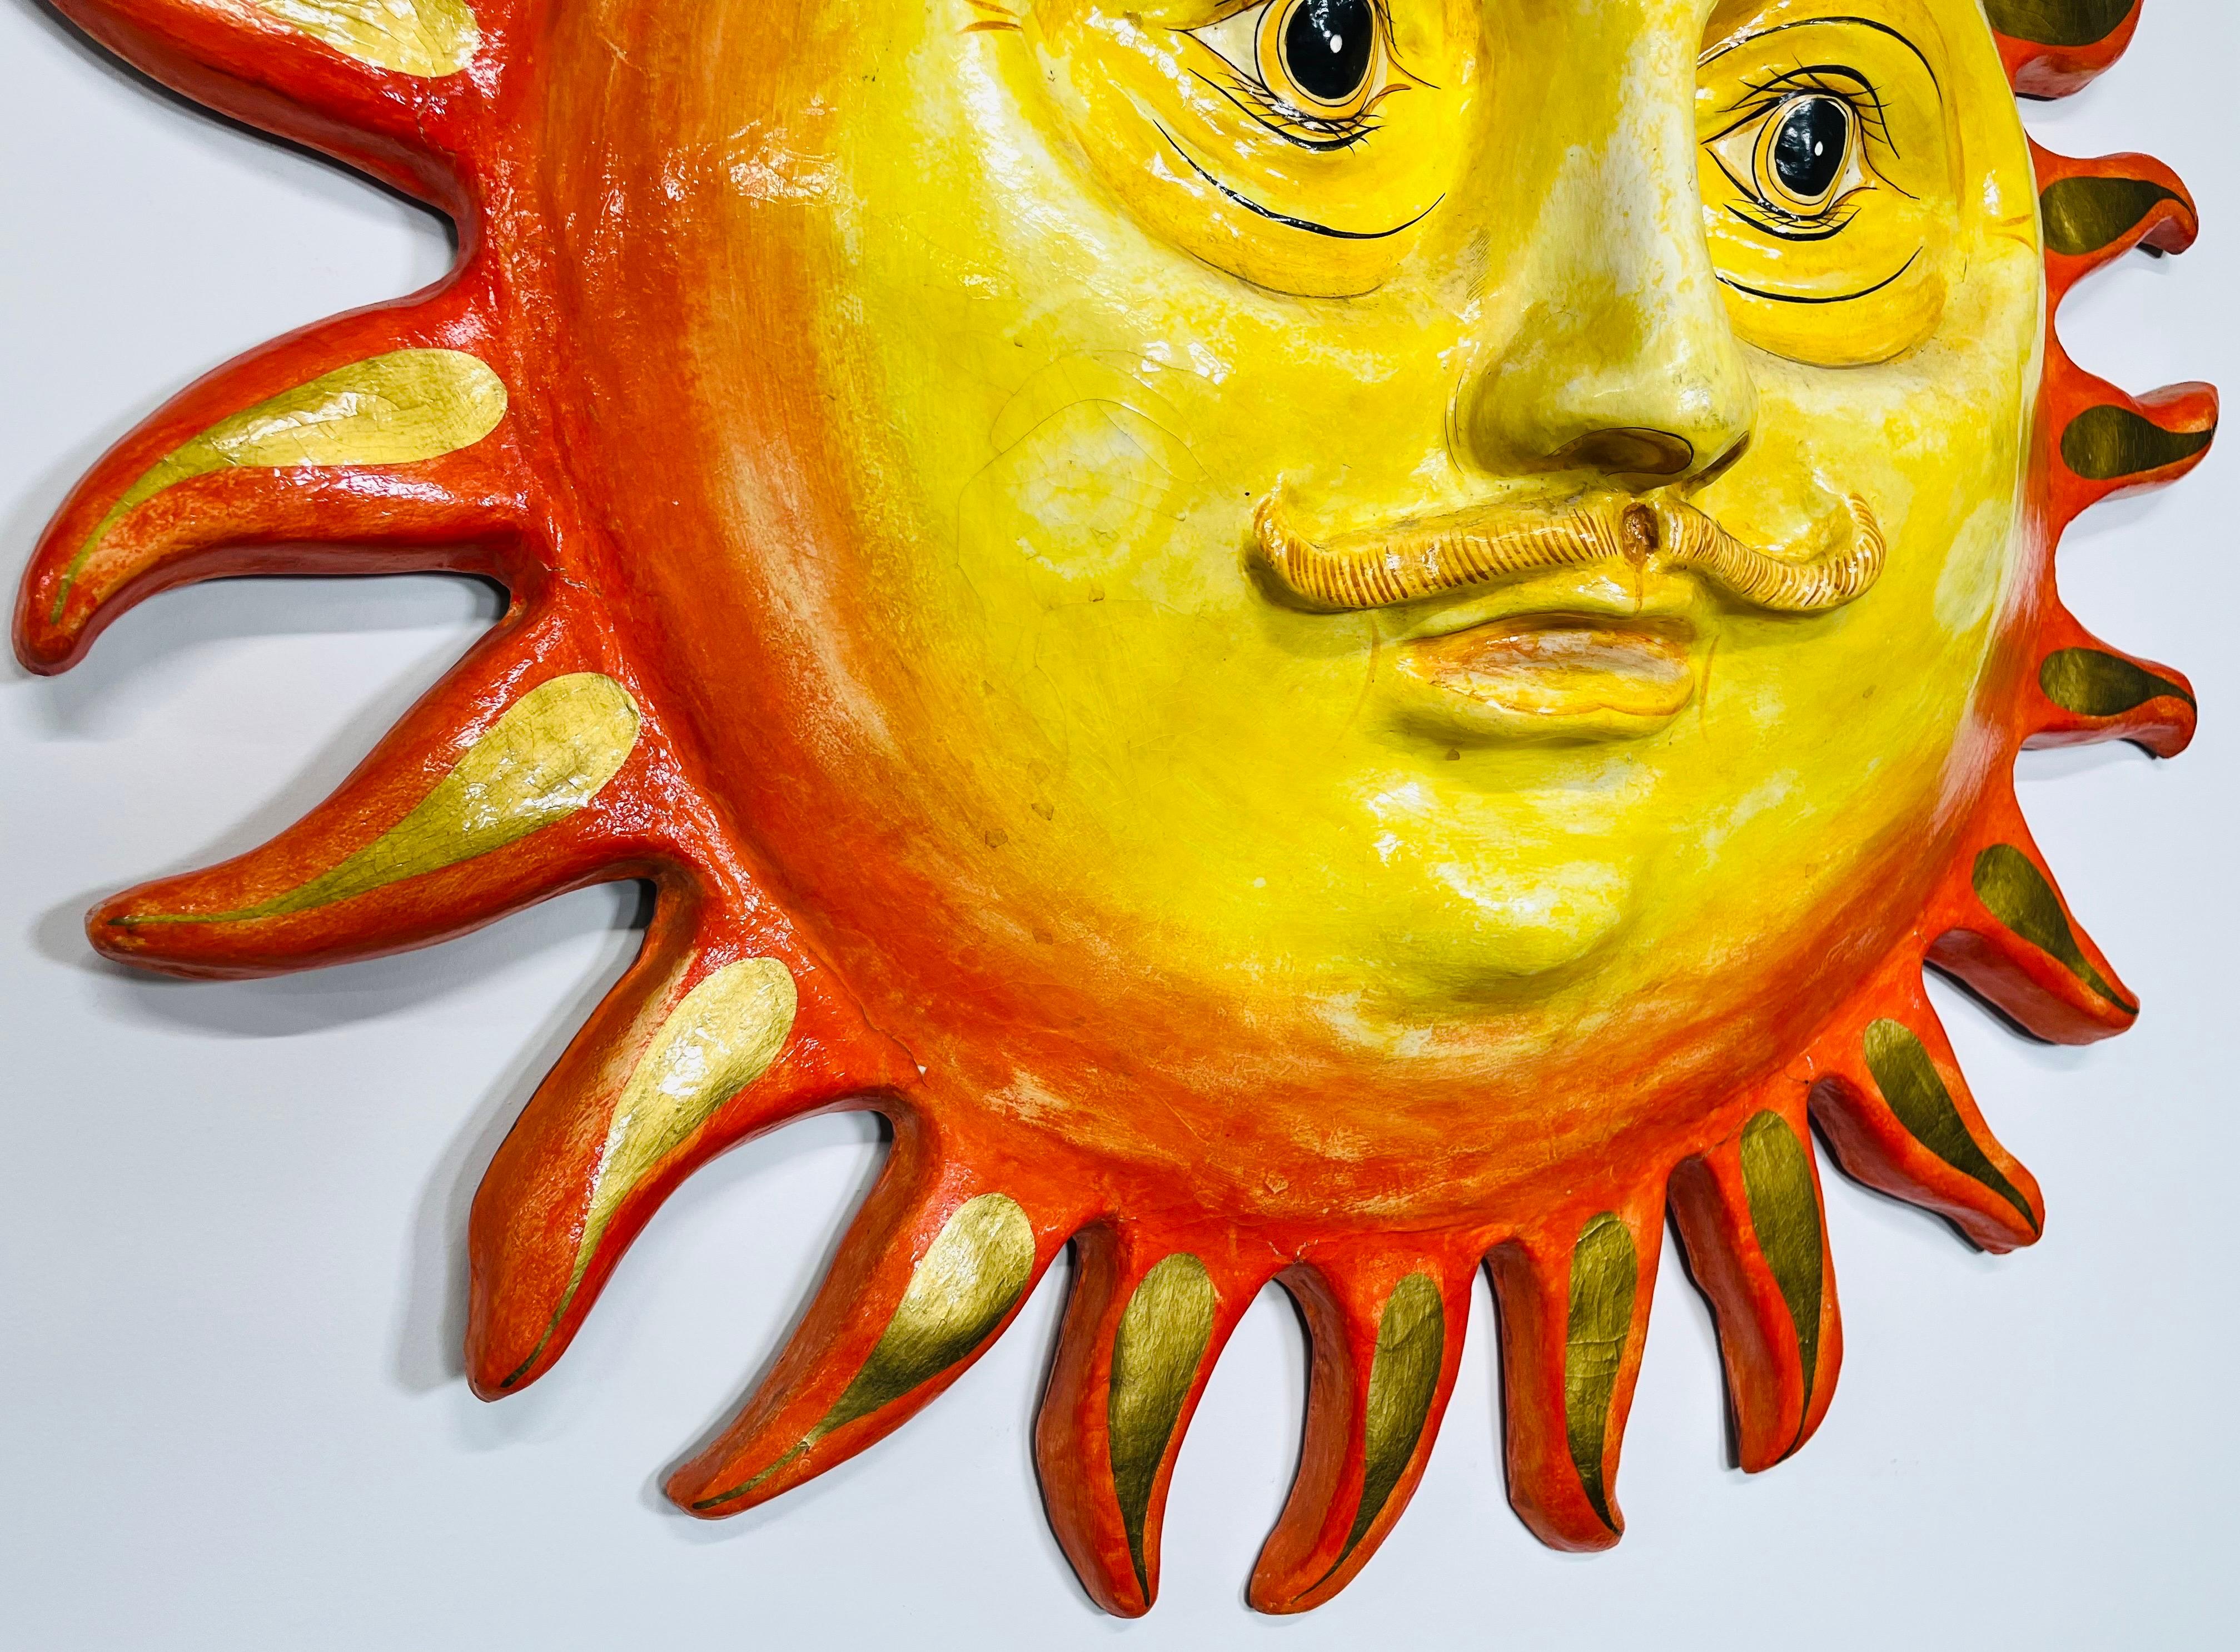 Hand-Crafted Monumental 42” Sergio Bustamante Smiling Sun Wall Sculpture